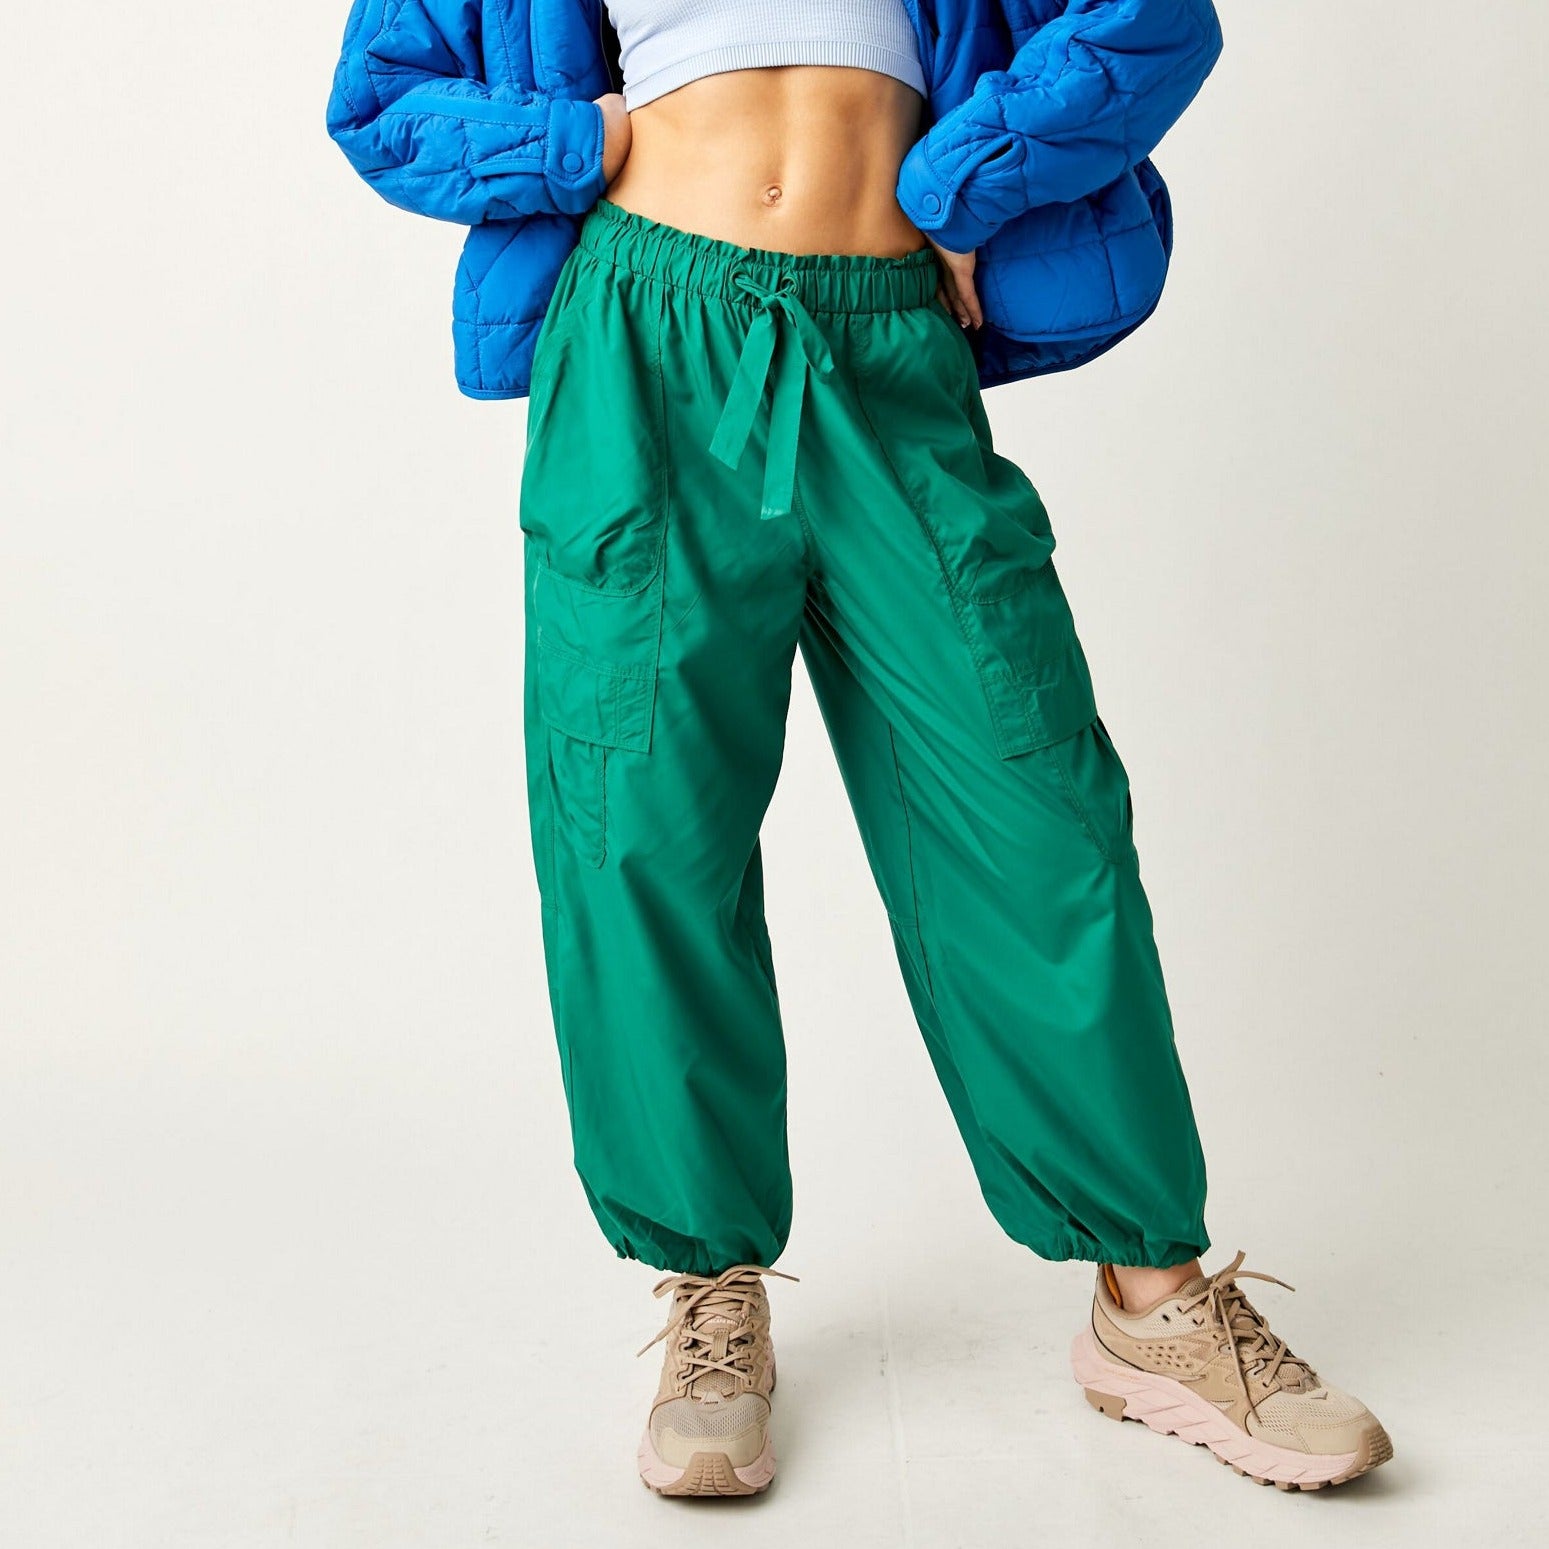 FP Movement Down to Earth Pants